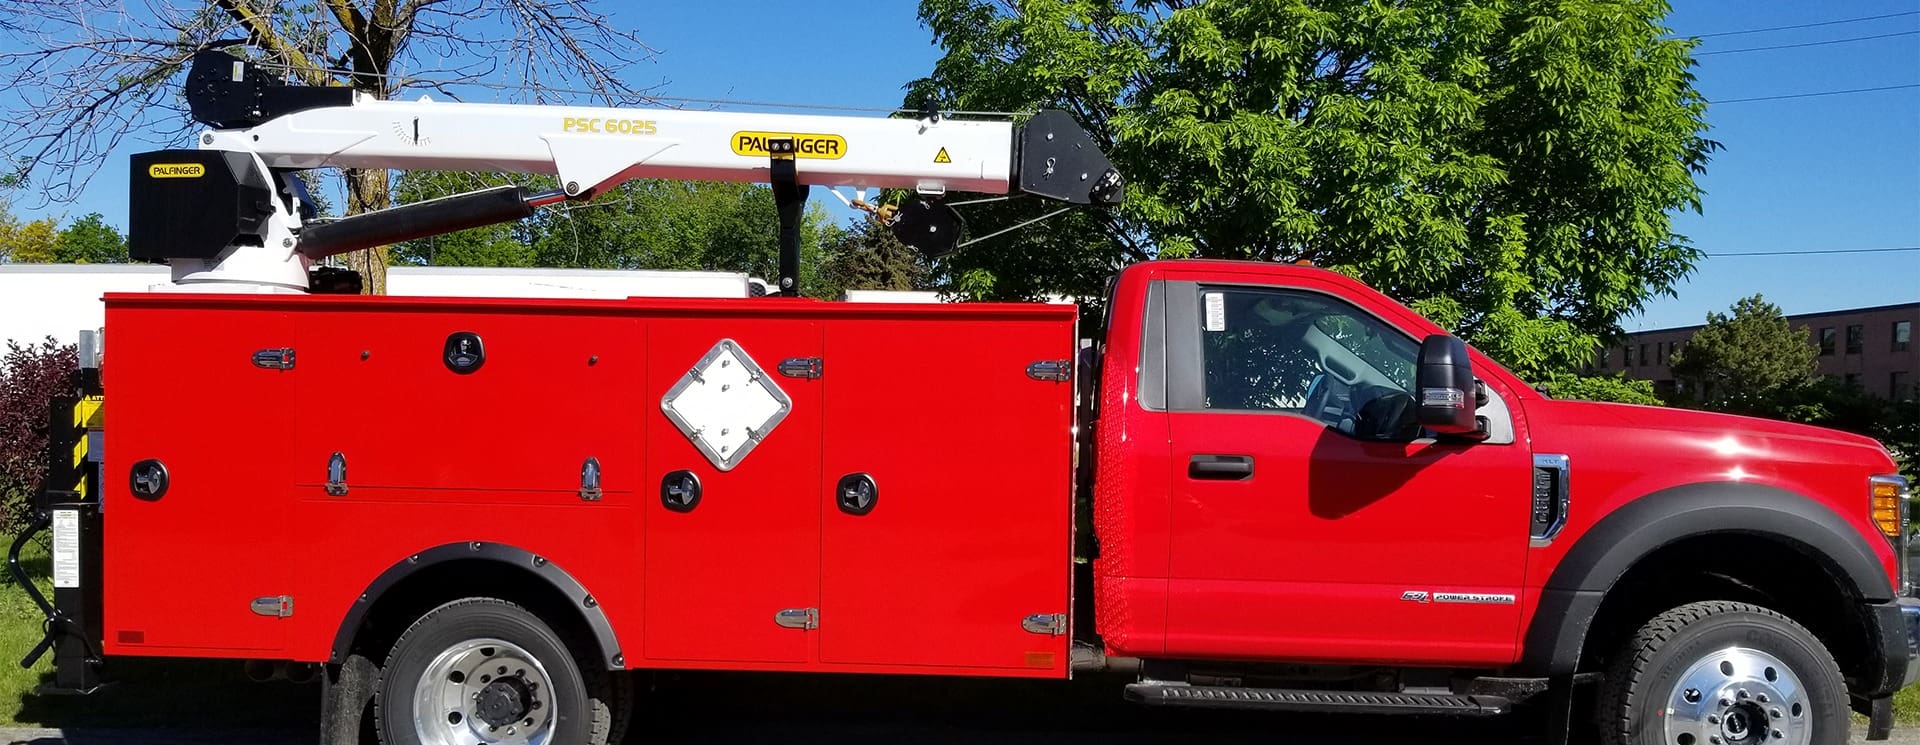 Red Mechanics Truck Bodies - side view with Pallinger crane attachment